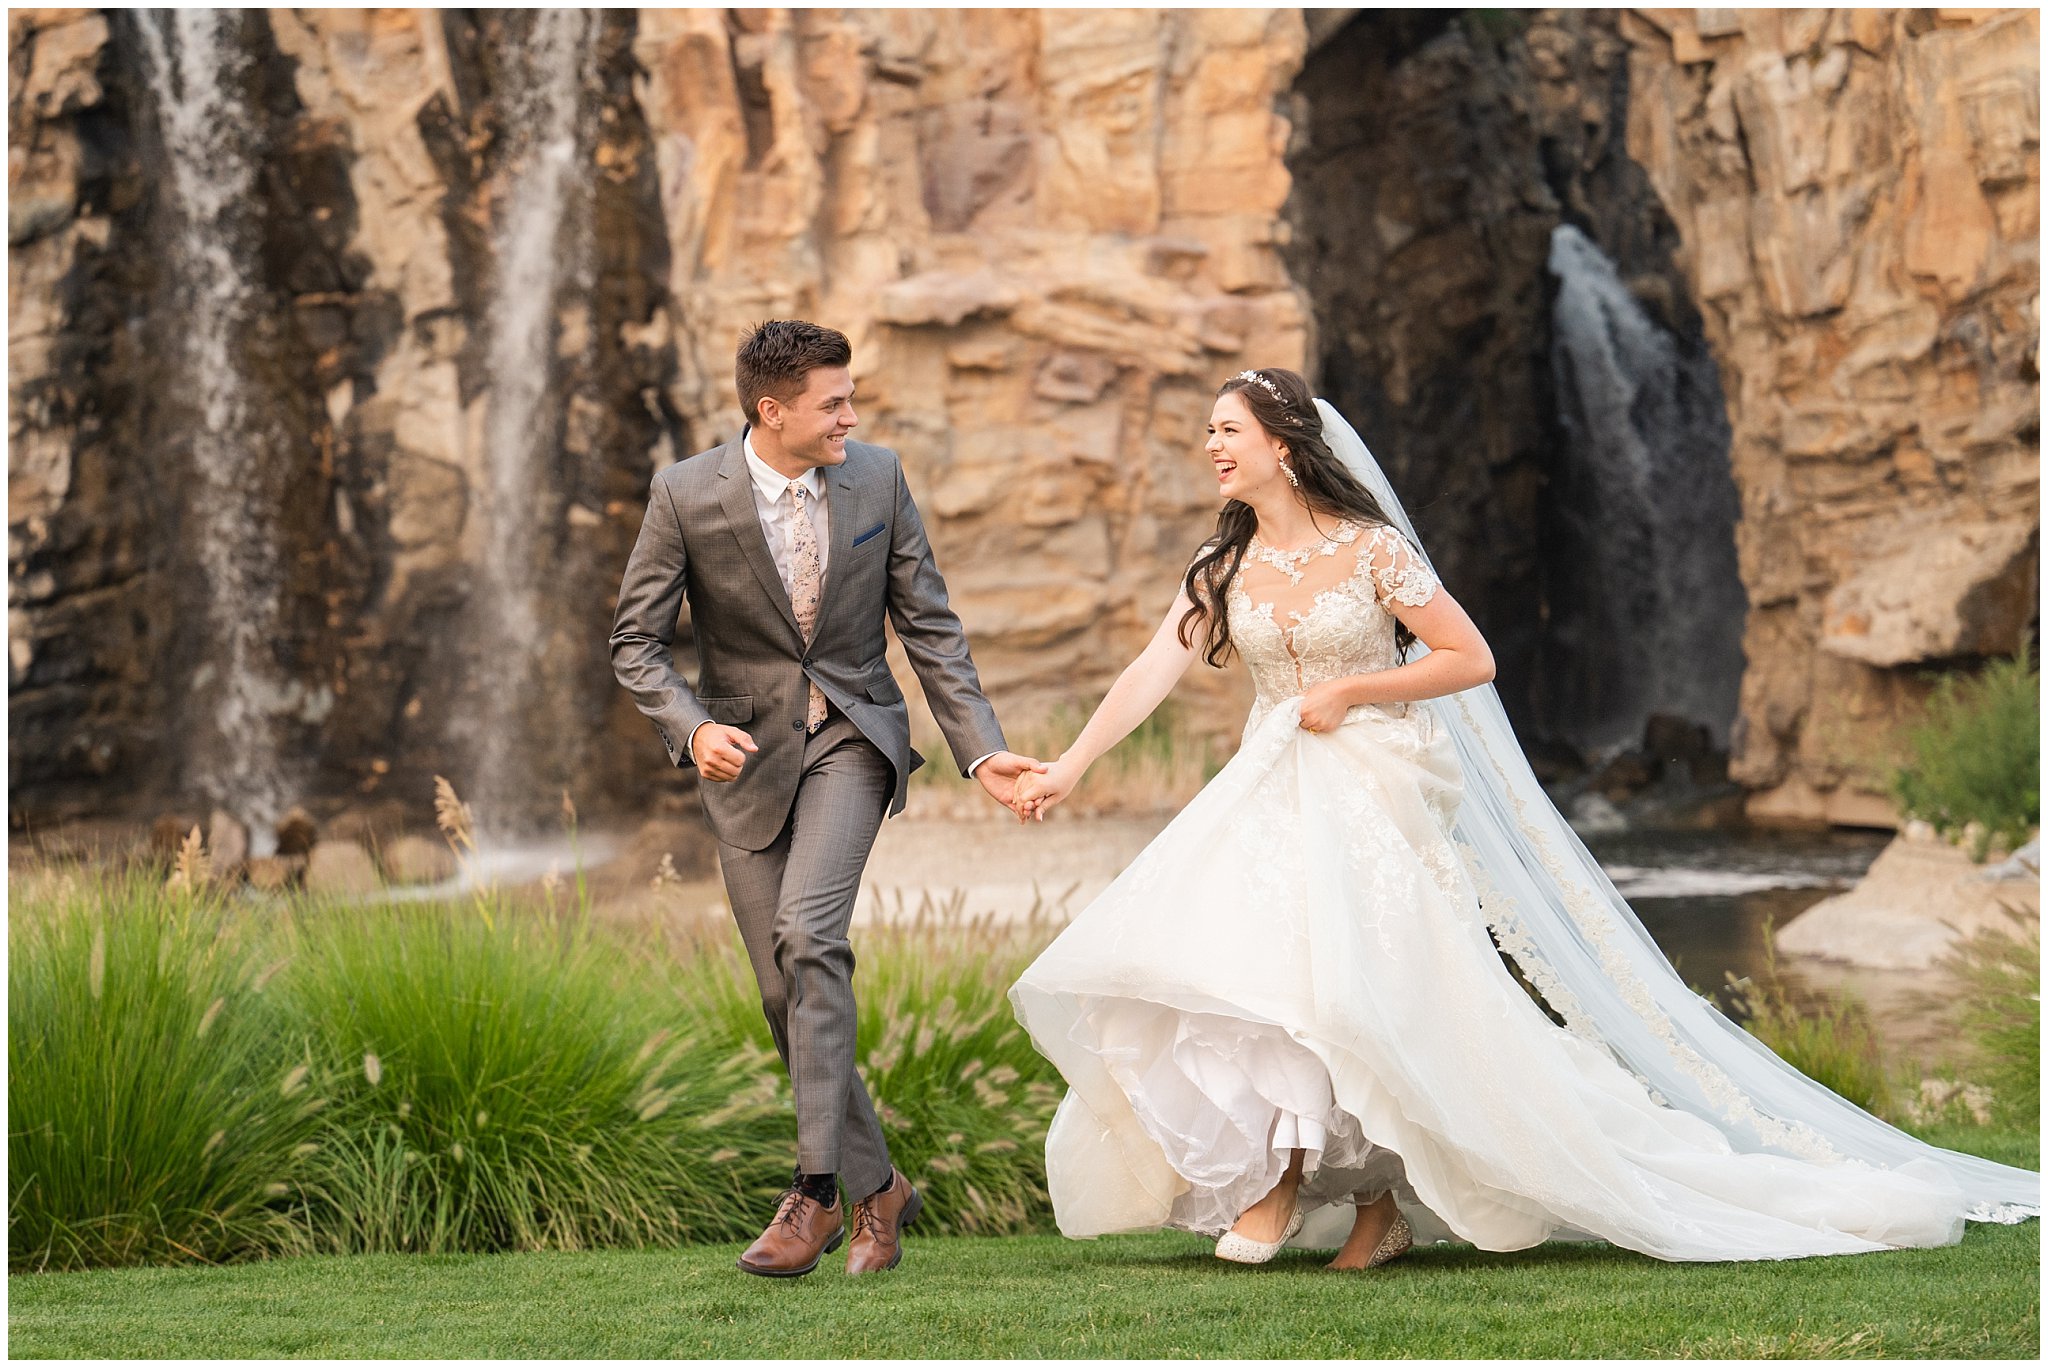 Bride and Groom in front of waterfalls during wedding portraits during the summer surrounded by flowers and gardens | Thanksgiving Point Ashton Garden Formal Session | Jessie and Dallin Photography